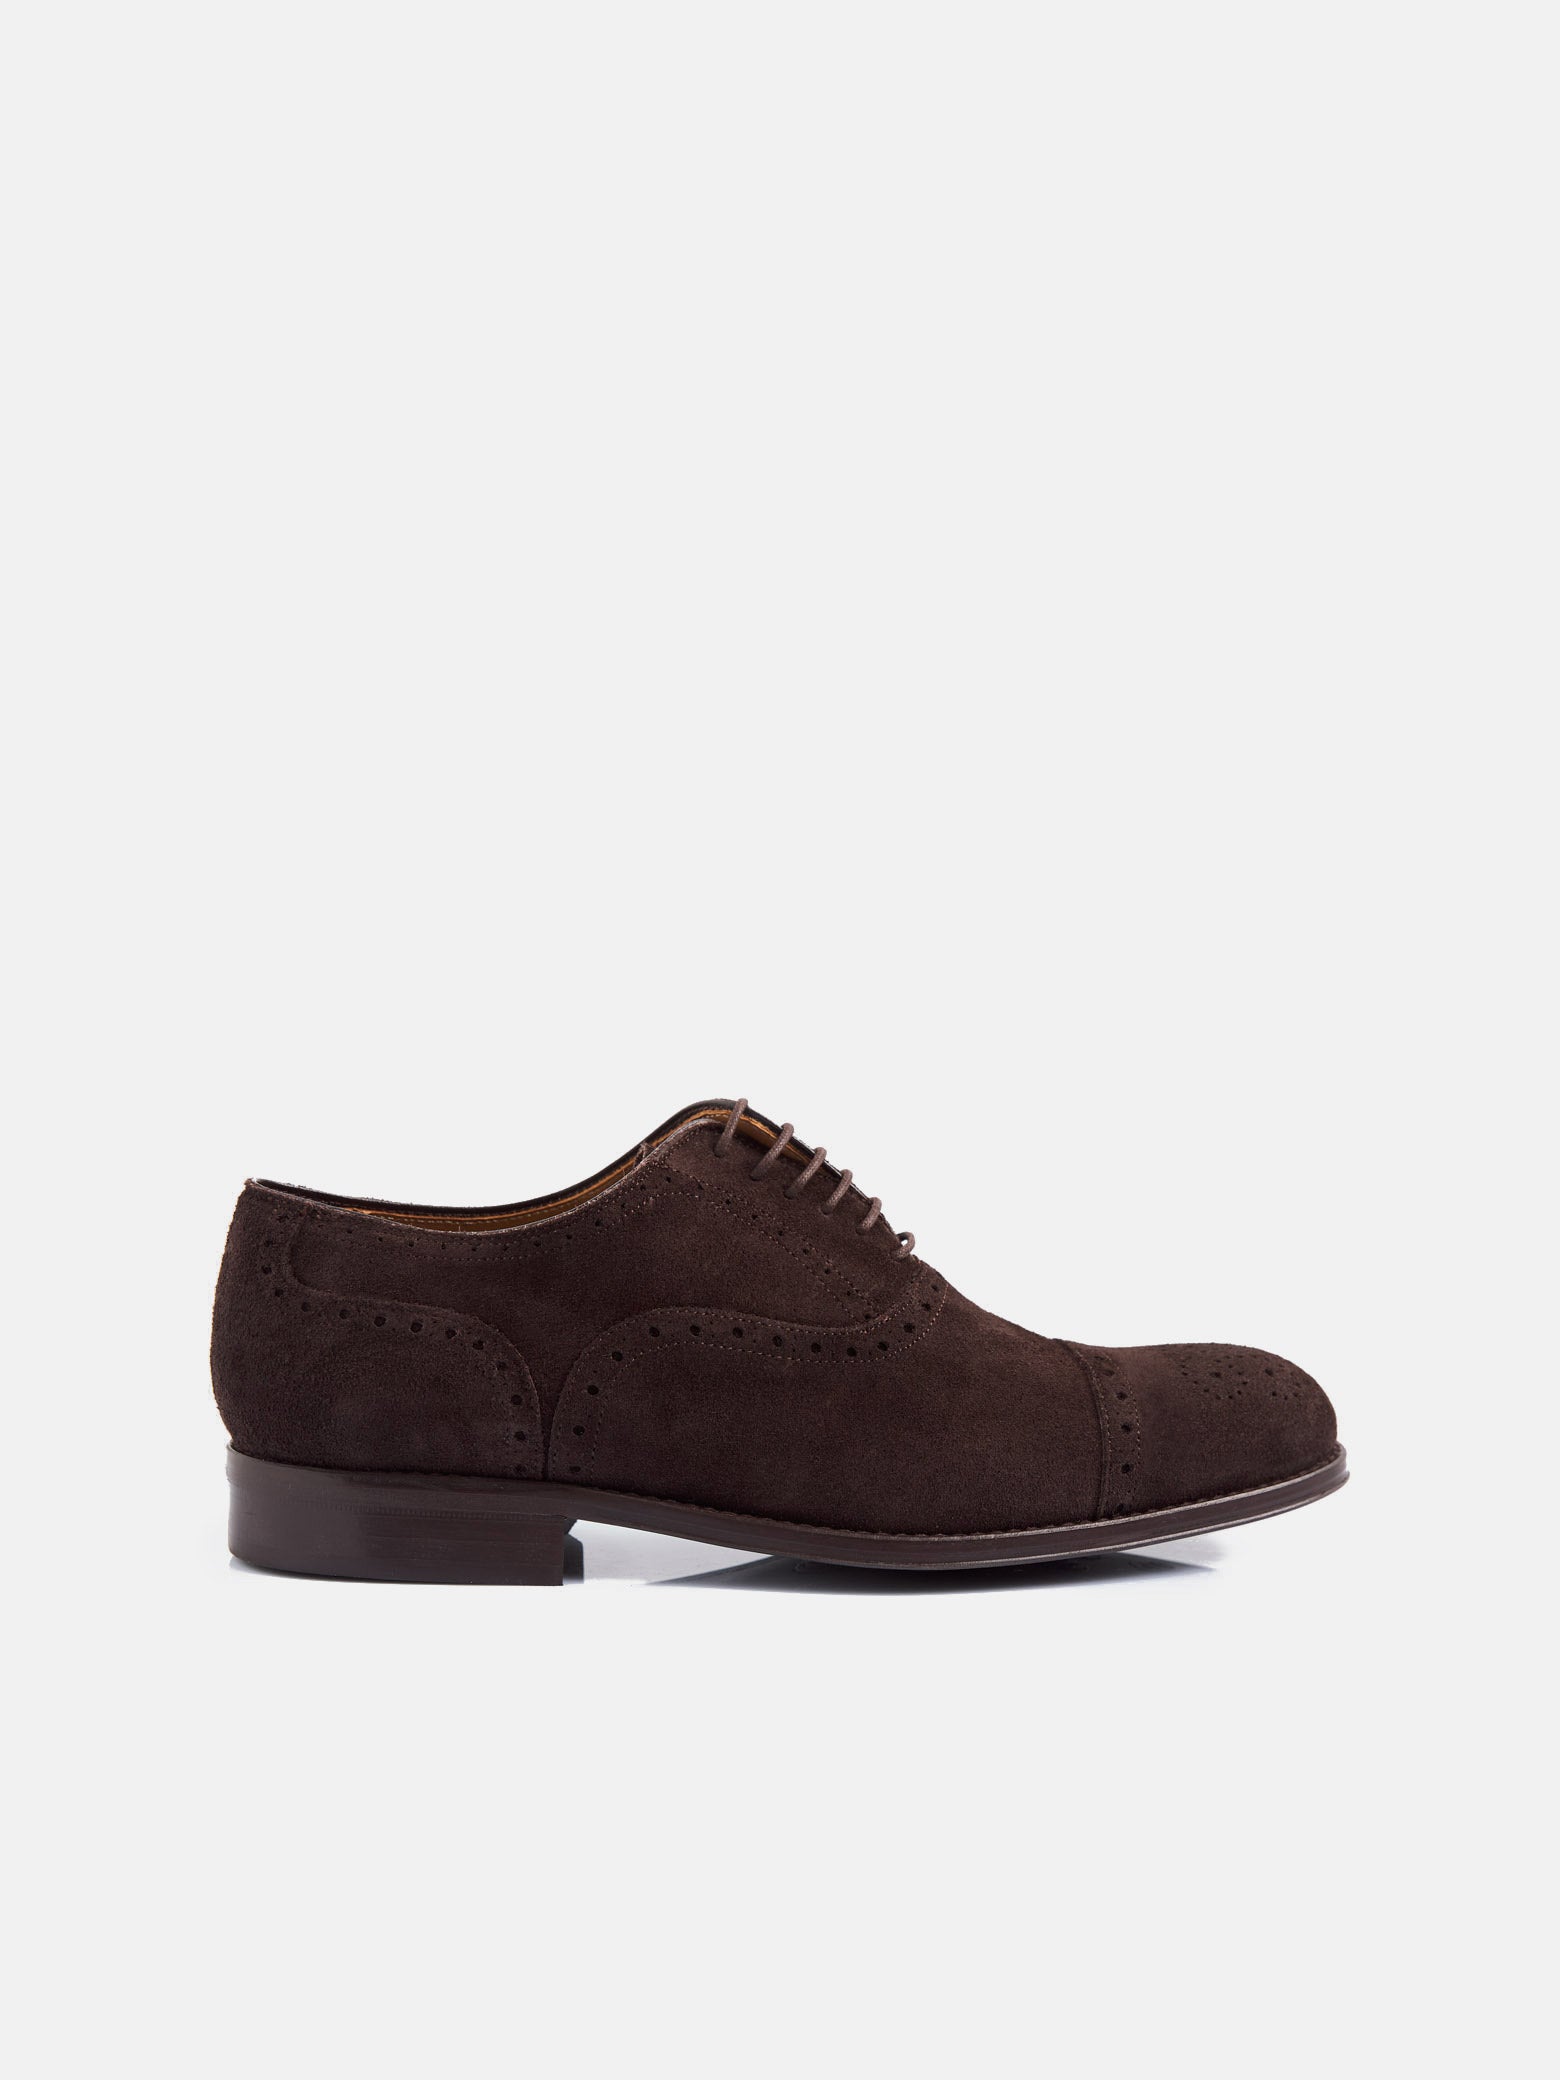 Classic brown perforated suede shoe